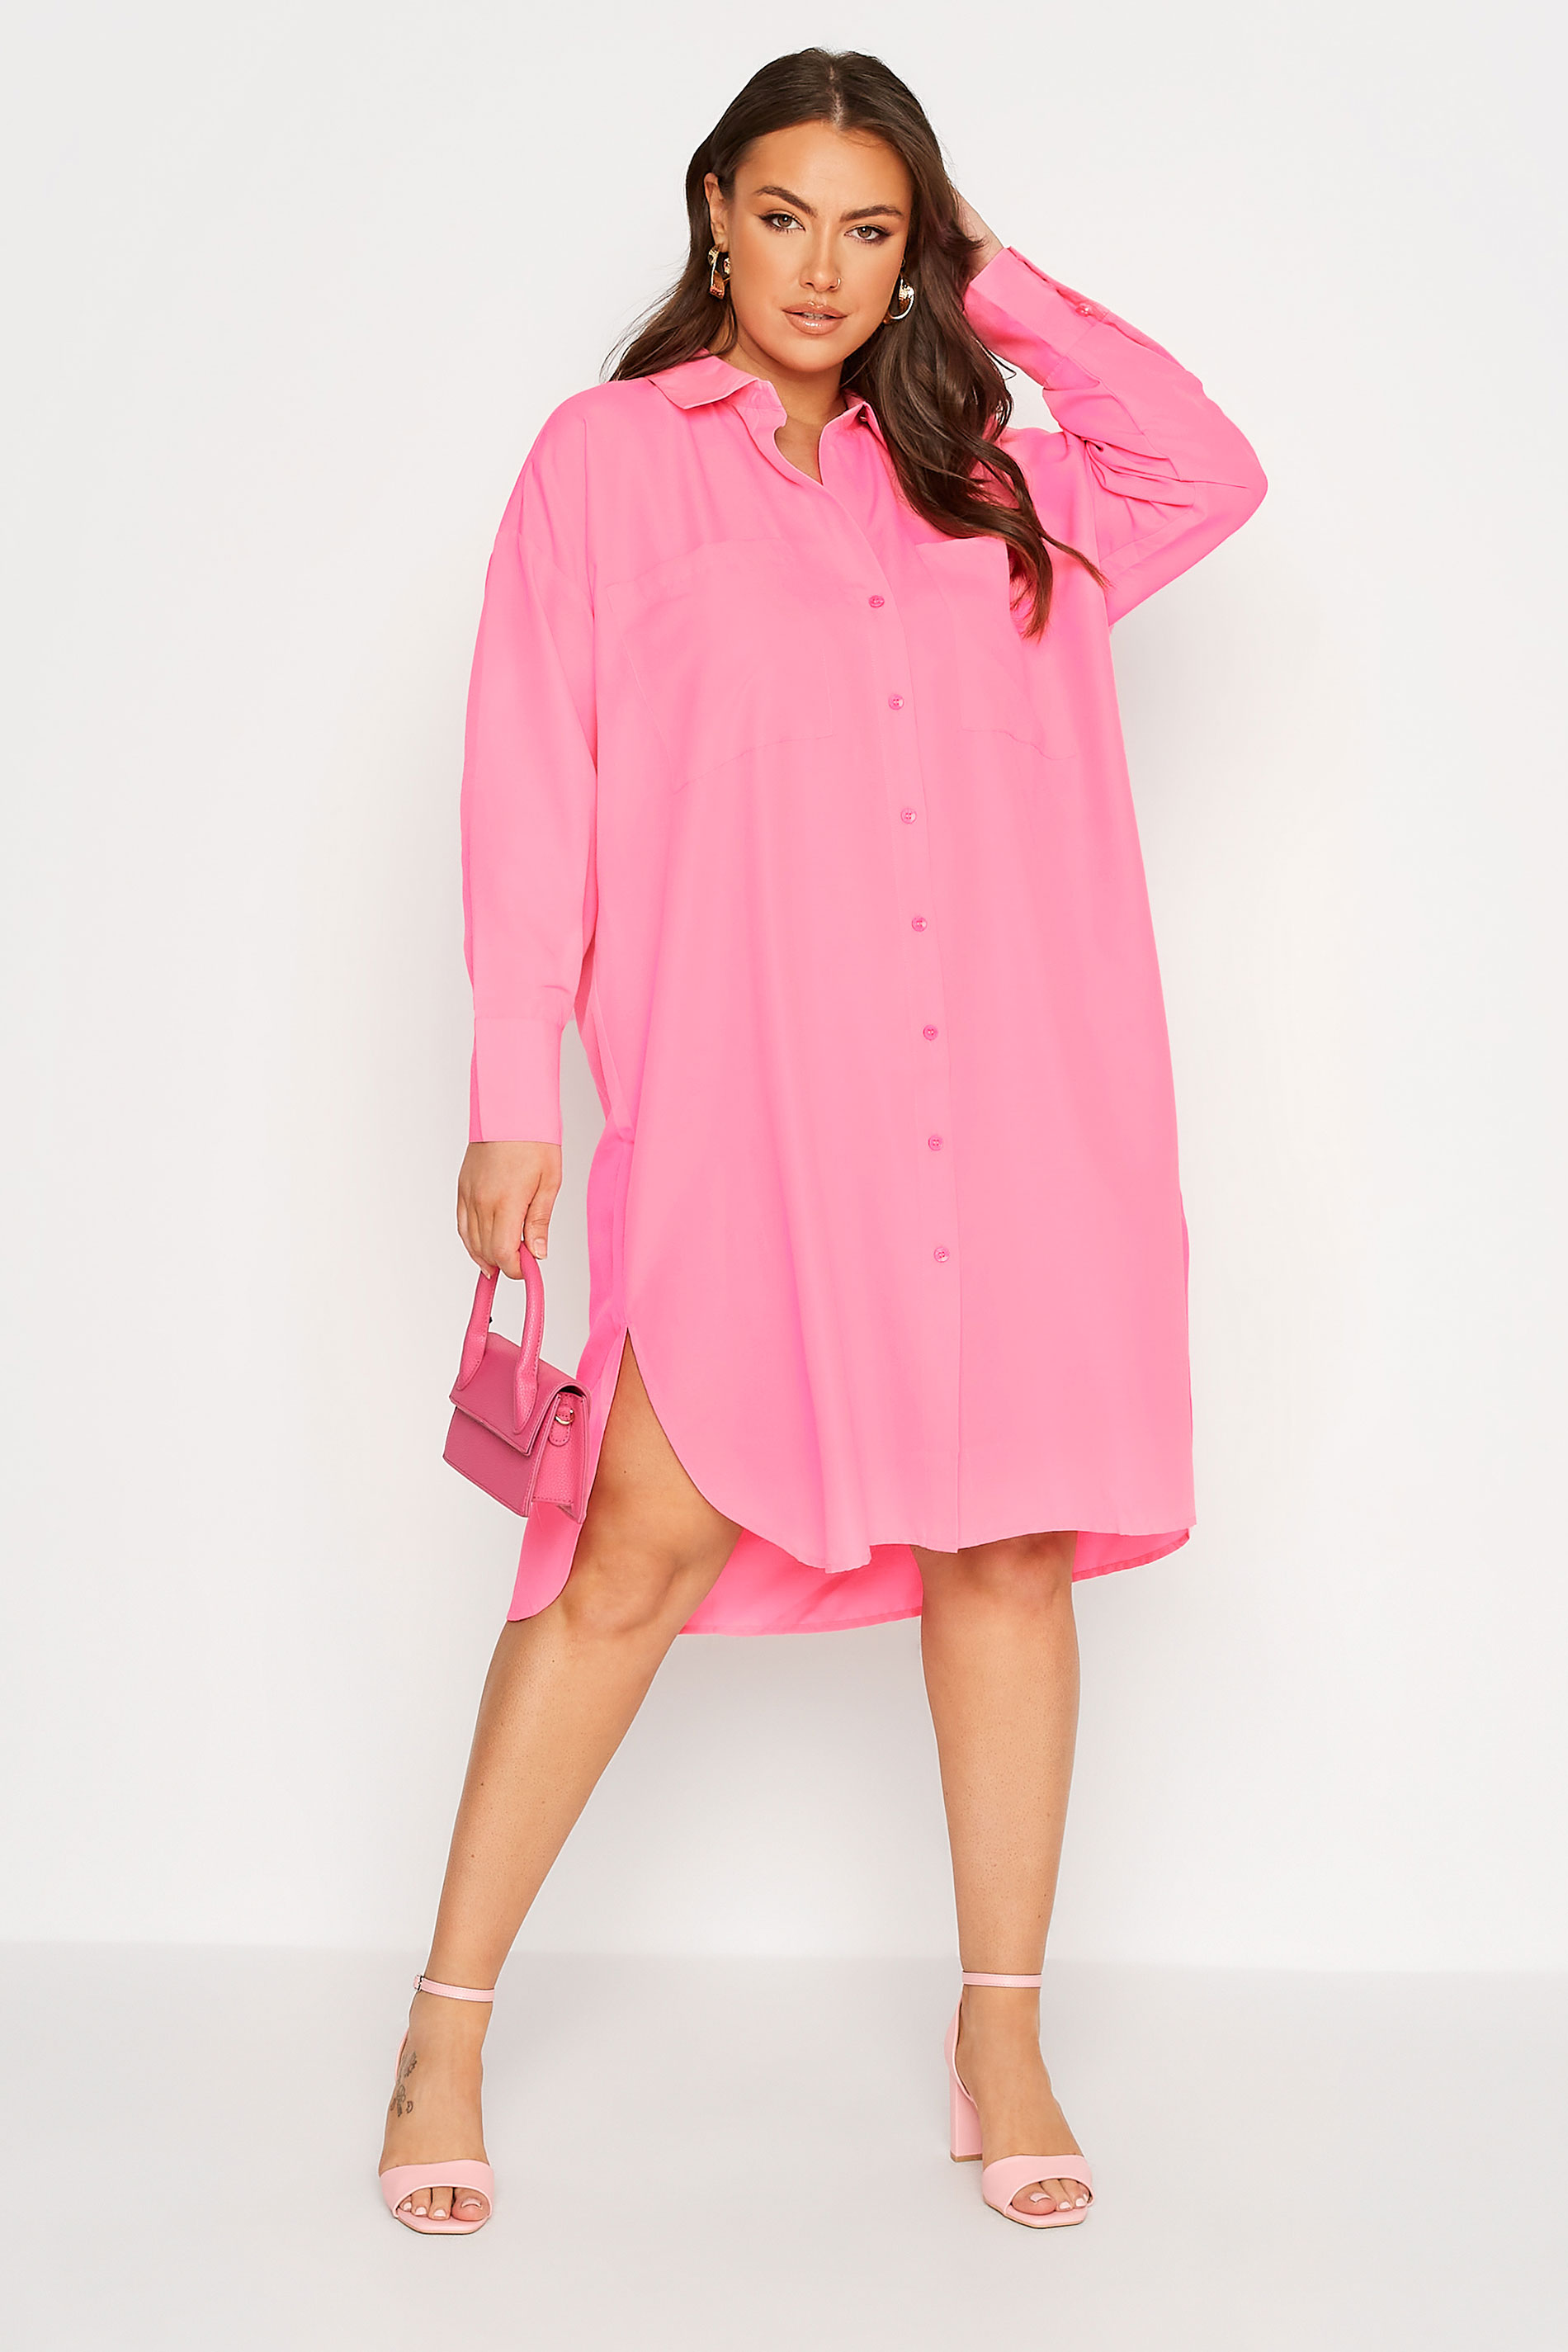 LIMITED COLLECTION Plus Size Neon Pink Midi Shirt Dress | Yours Clothing 1